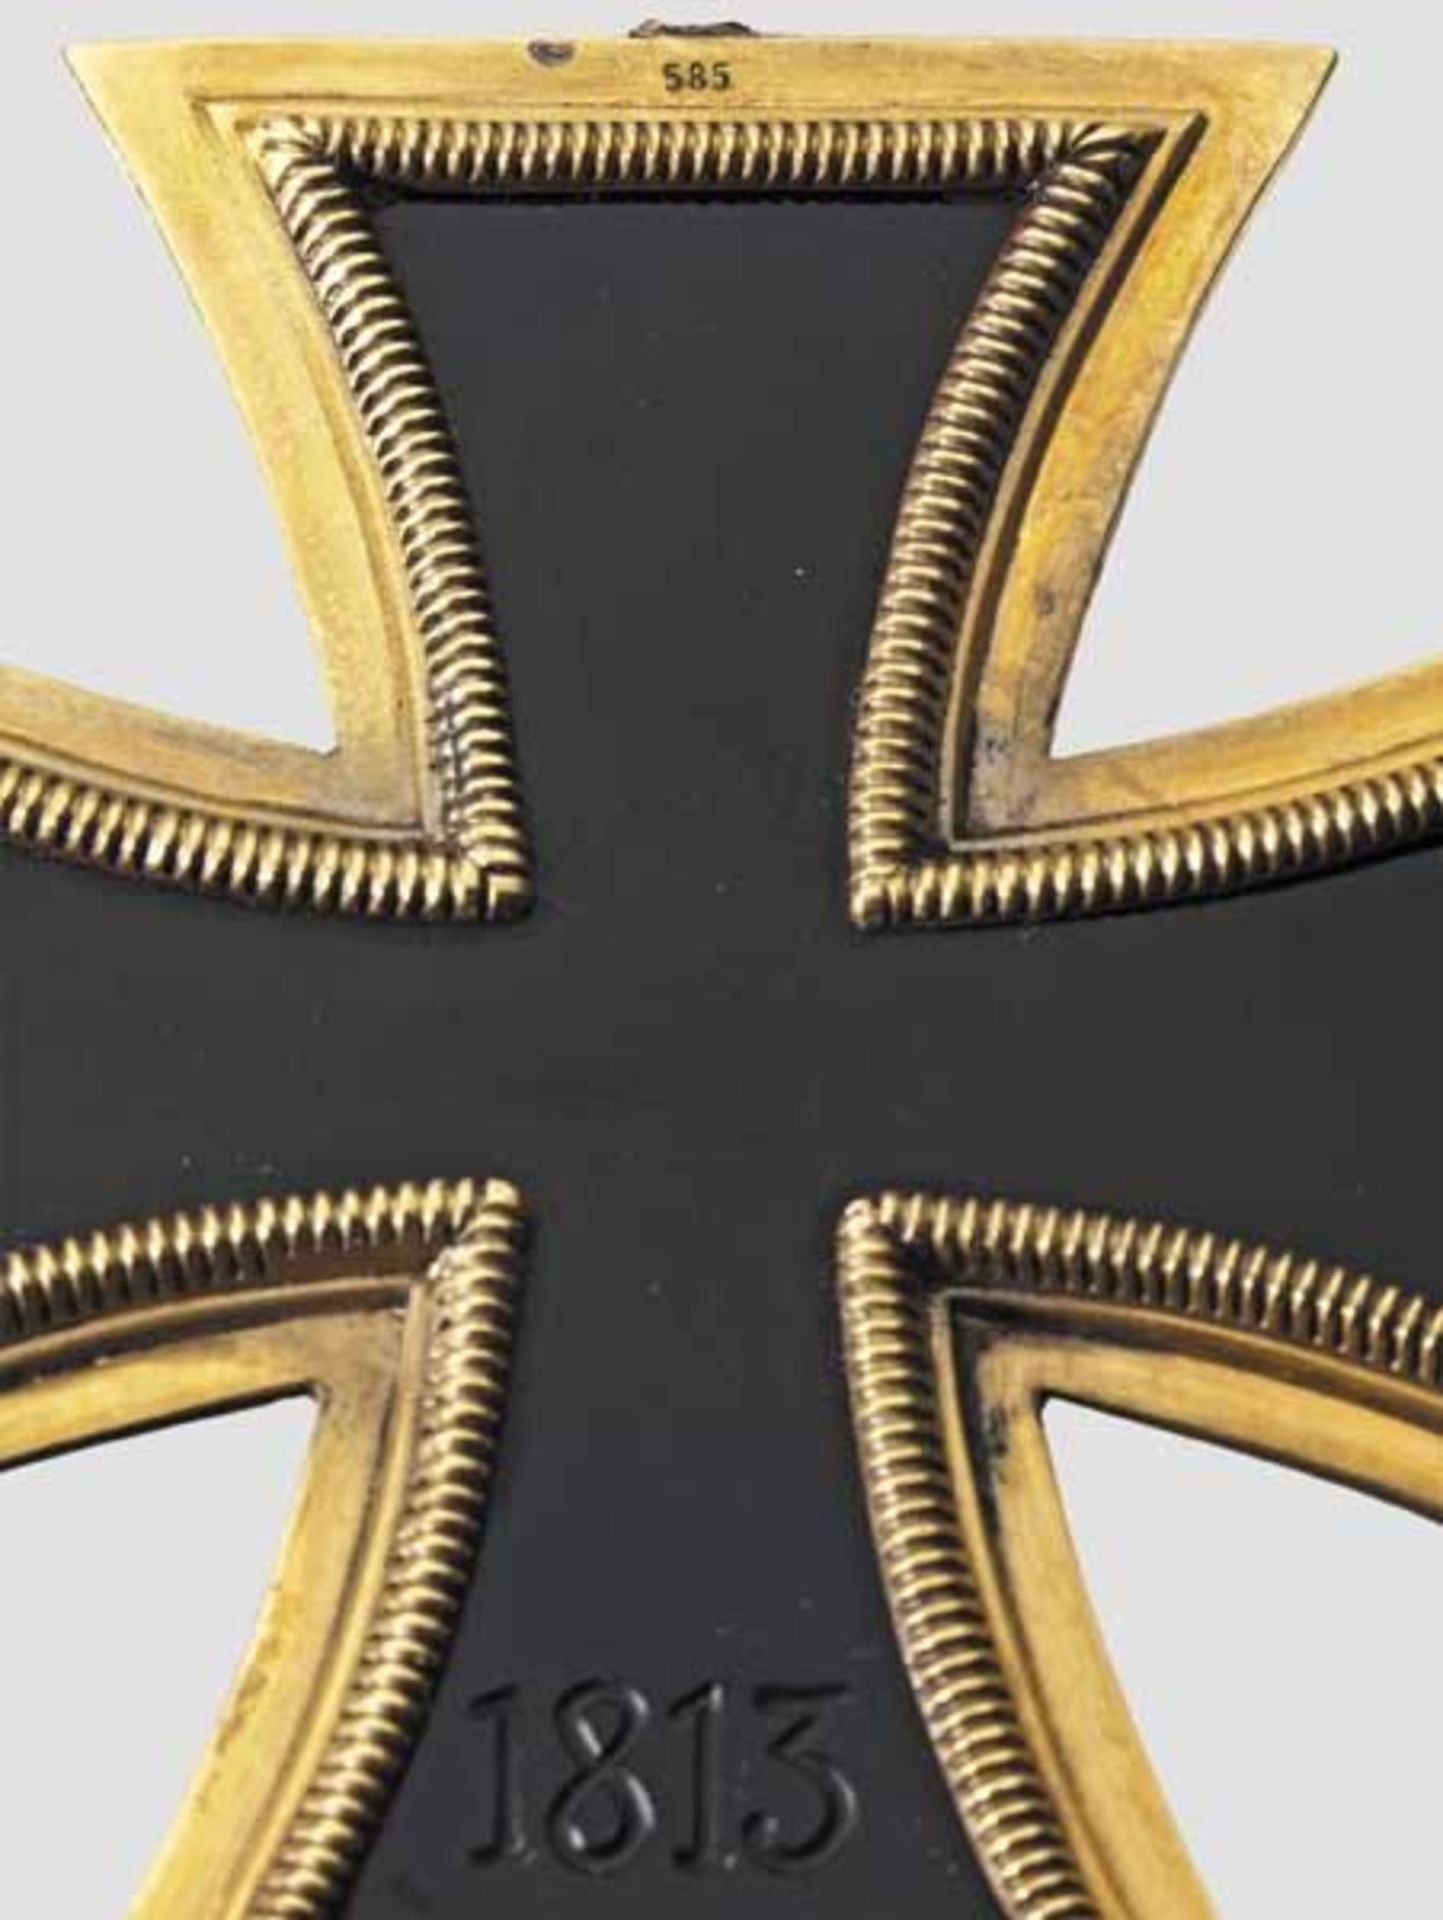 J. Godet & Son - a Grand Cross of the Iron Cross of 1939 in Gold and Onyx - probably a workshop - Bild 4 aus 4